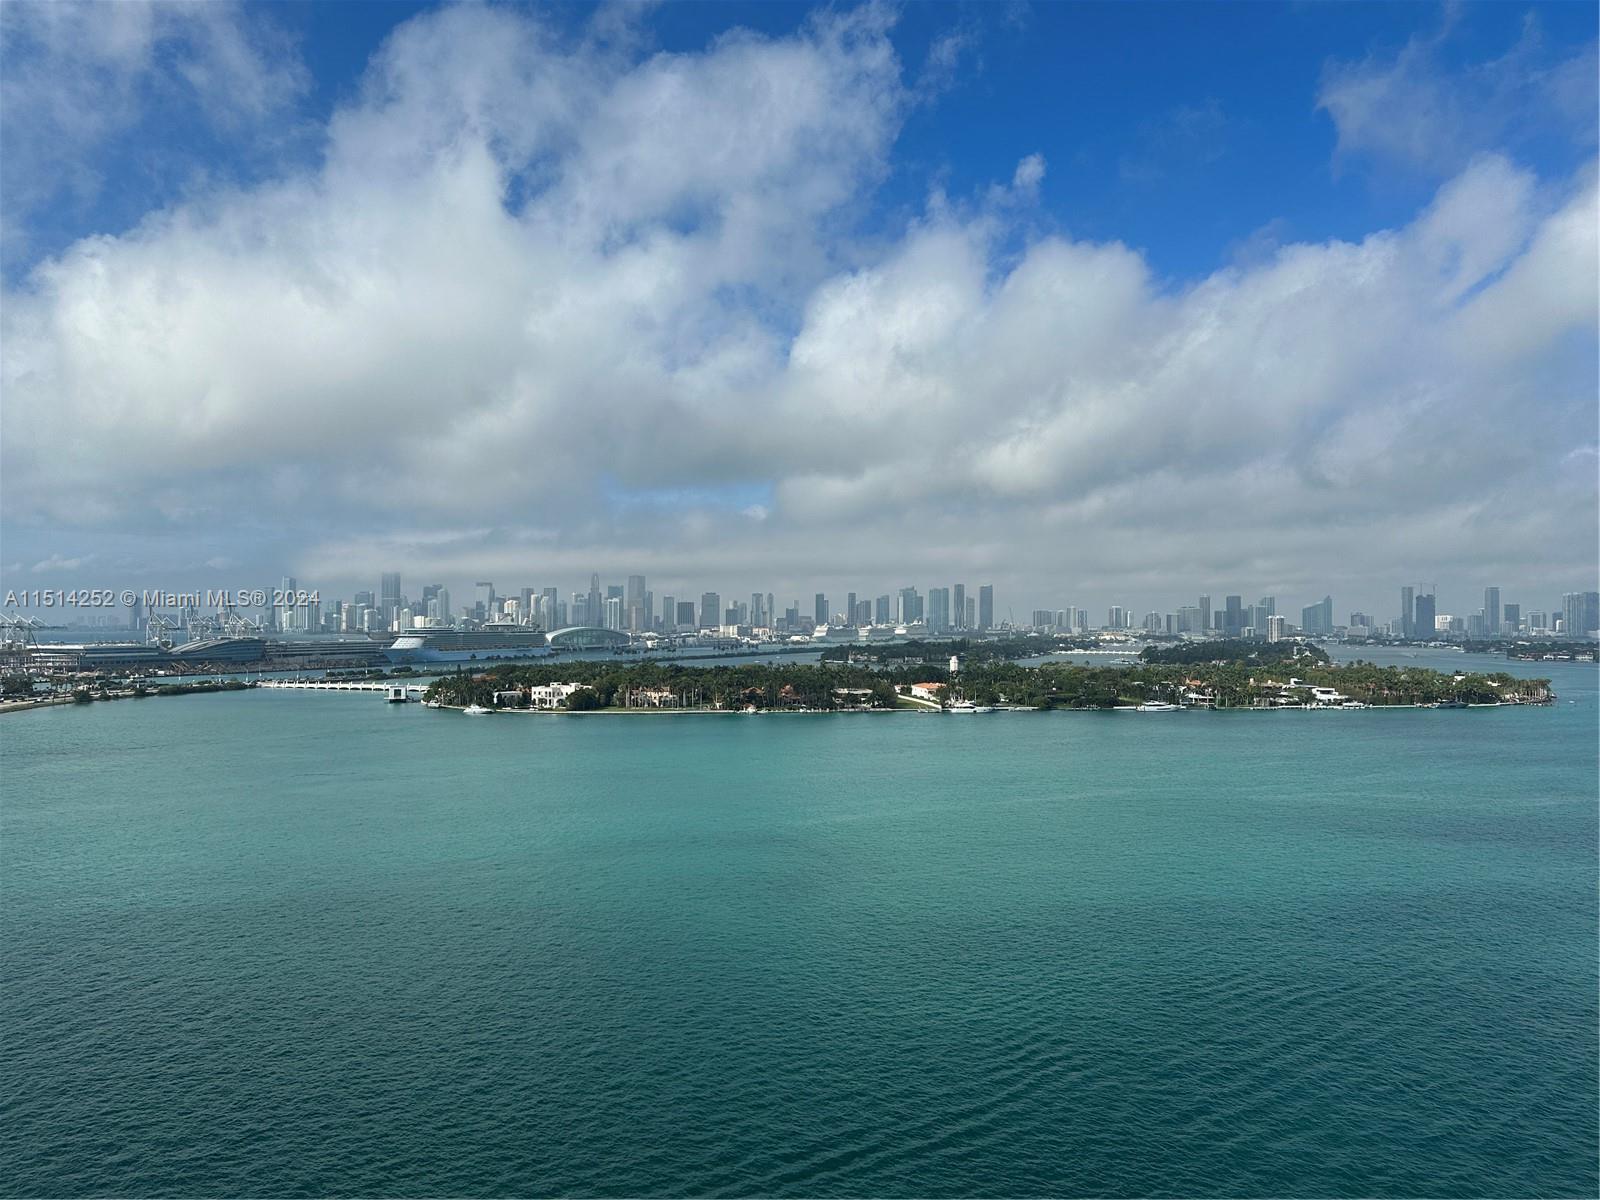 Breathtaking water, Miami skyline, and Star Island views from the 18th floor at the Bentley Bay. This 1 bed/1 bath features 24"x24" marble floor, custom-made blinds, floor-to-ceiling impact windows, open kitchen with Italian cabinetry, marble countertop, Sub Zero, and Miele stainless steel appliances. Large bathroom with bathtub and shower. Only 4 units per floor. Valet parking, pool, fitness center, spa, security, and much more...The Bentley Bay is located just a few steps away from The Miami Beach Marina, South Pointe Park, Whole Foods...Enjoy the sunset having a glass of wine on the balcony. Apt 1813 also for rent at $5500/m.
SHORT TERM RENT from two (2) to six (6) months !!!!!